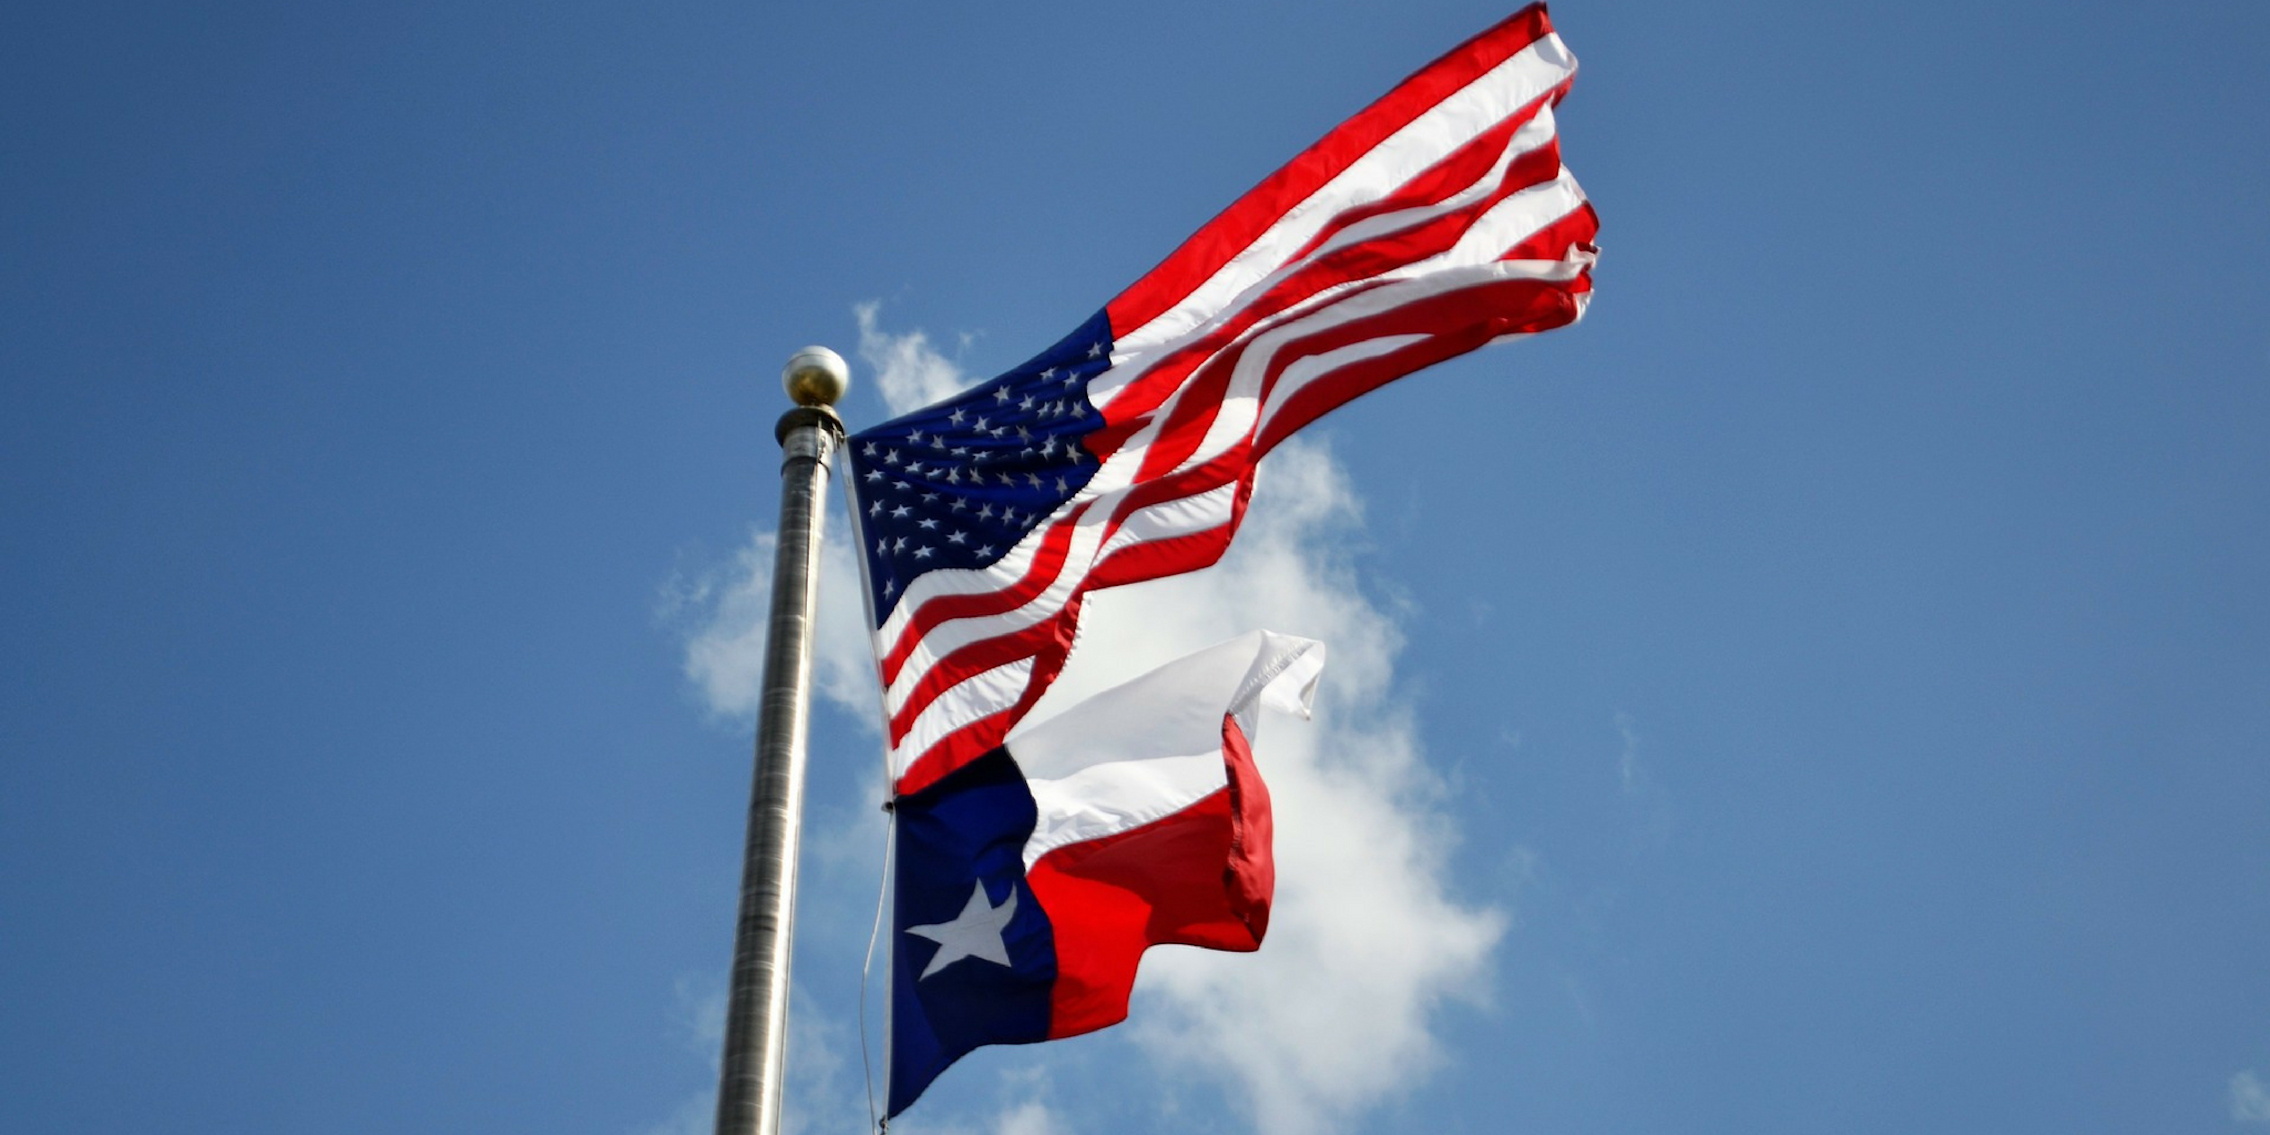 The U.S. and Texas flags